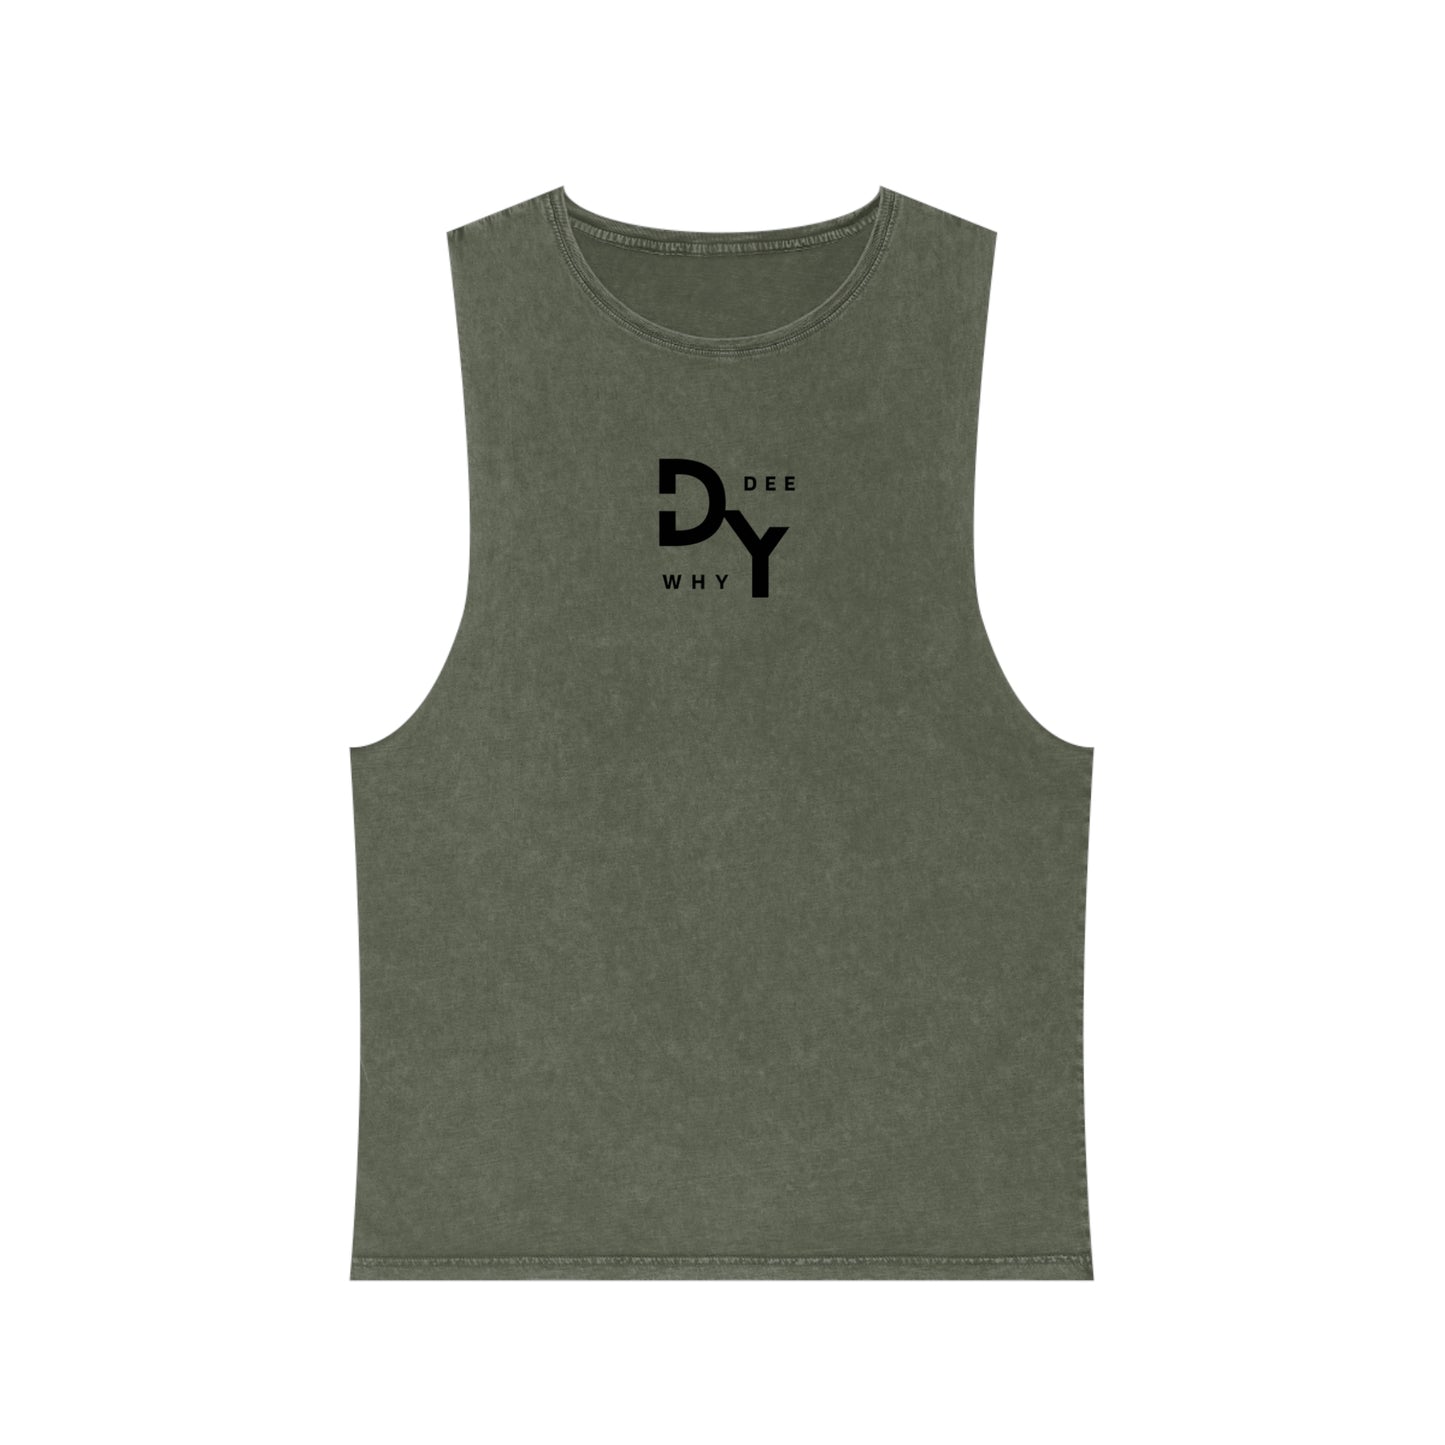 Stonewash Tank Top with Northern Beaches Dee Why logo